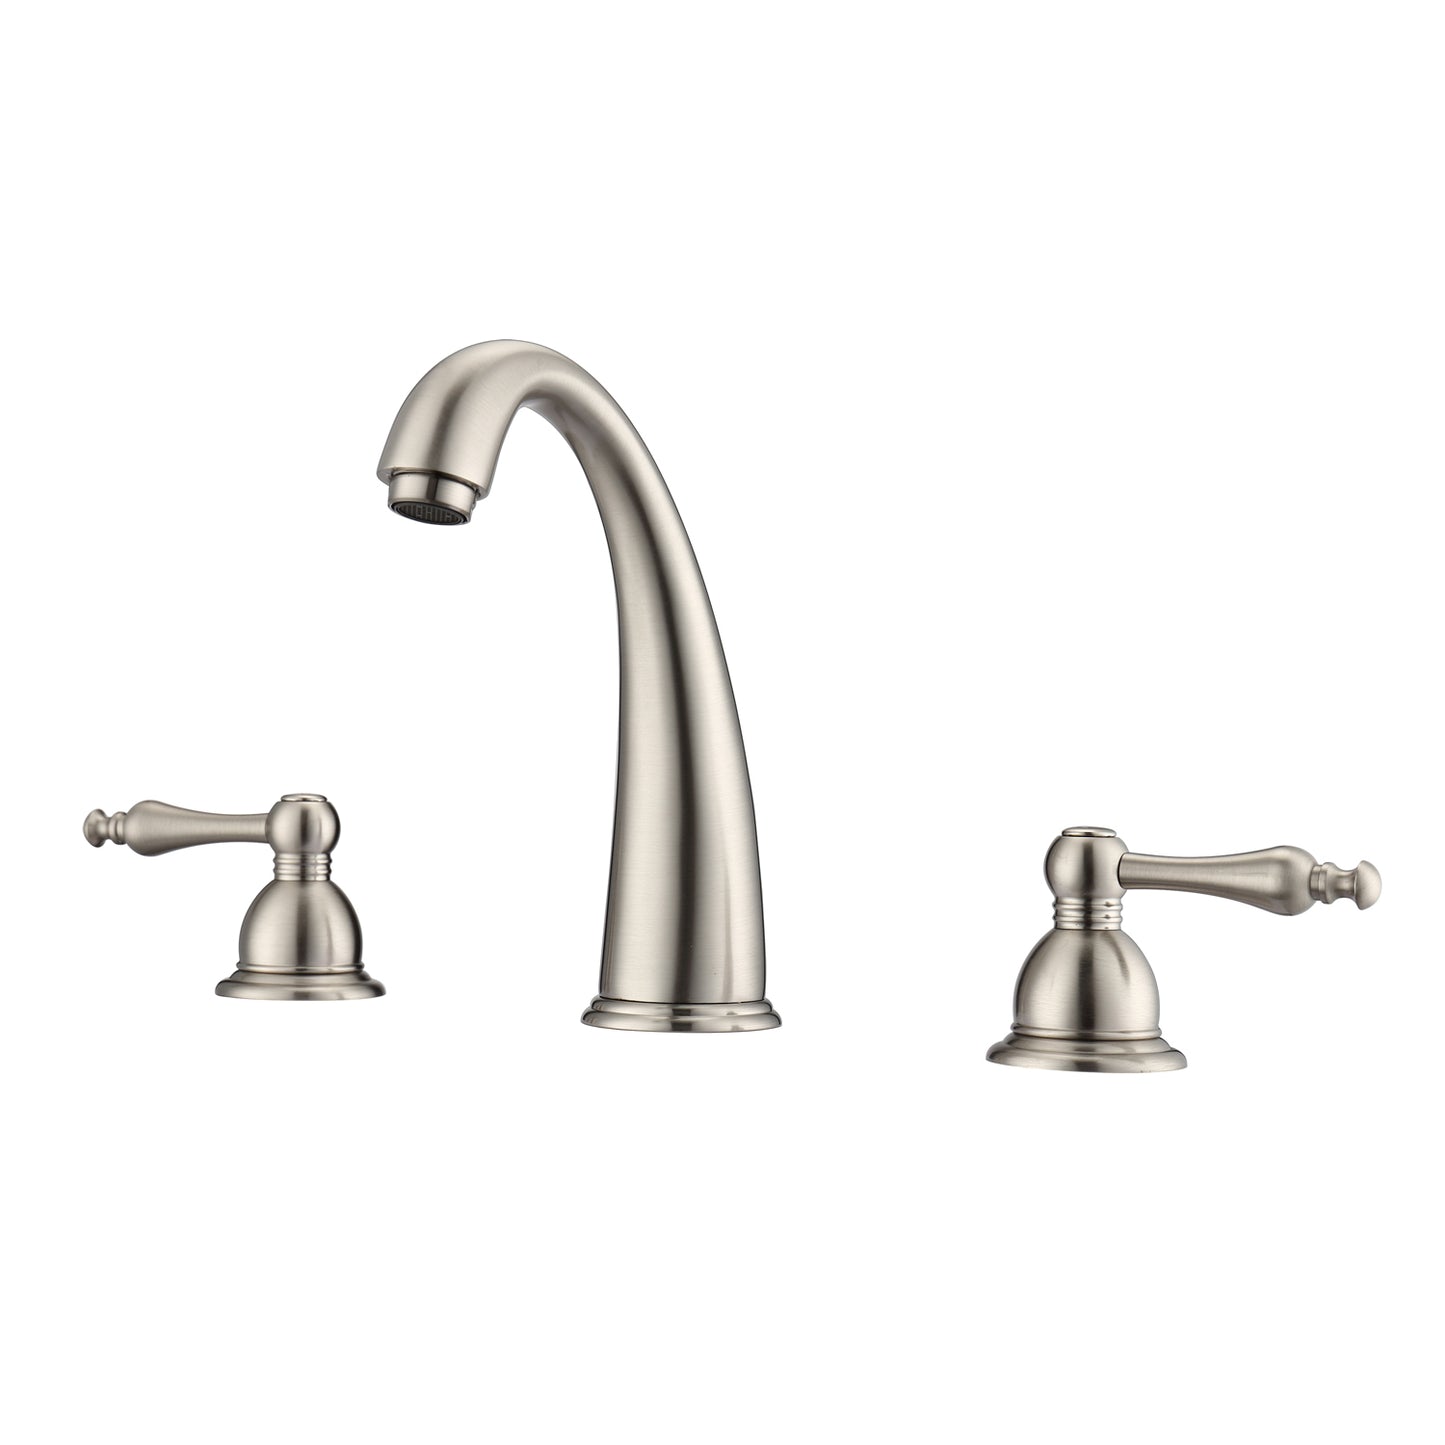 Maddox 8" Widespread Brushed Nickel Bathroom Faucet with Metal Lever Handles